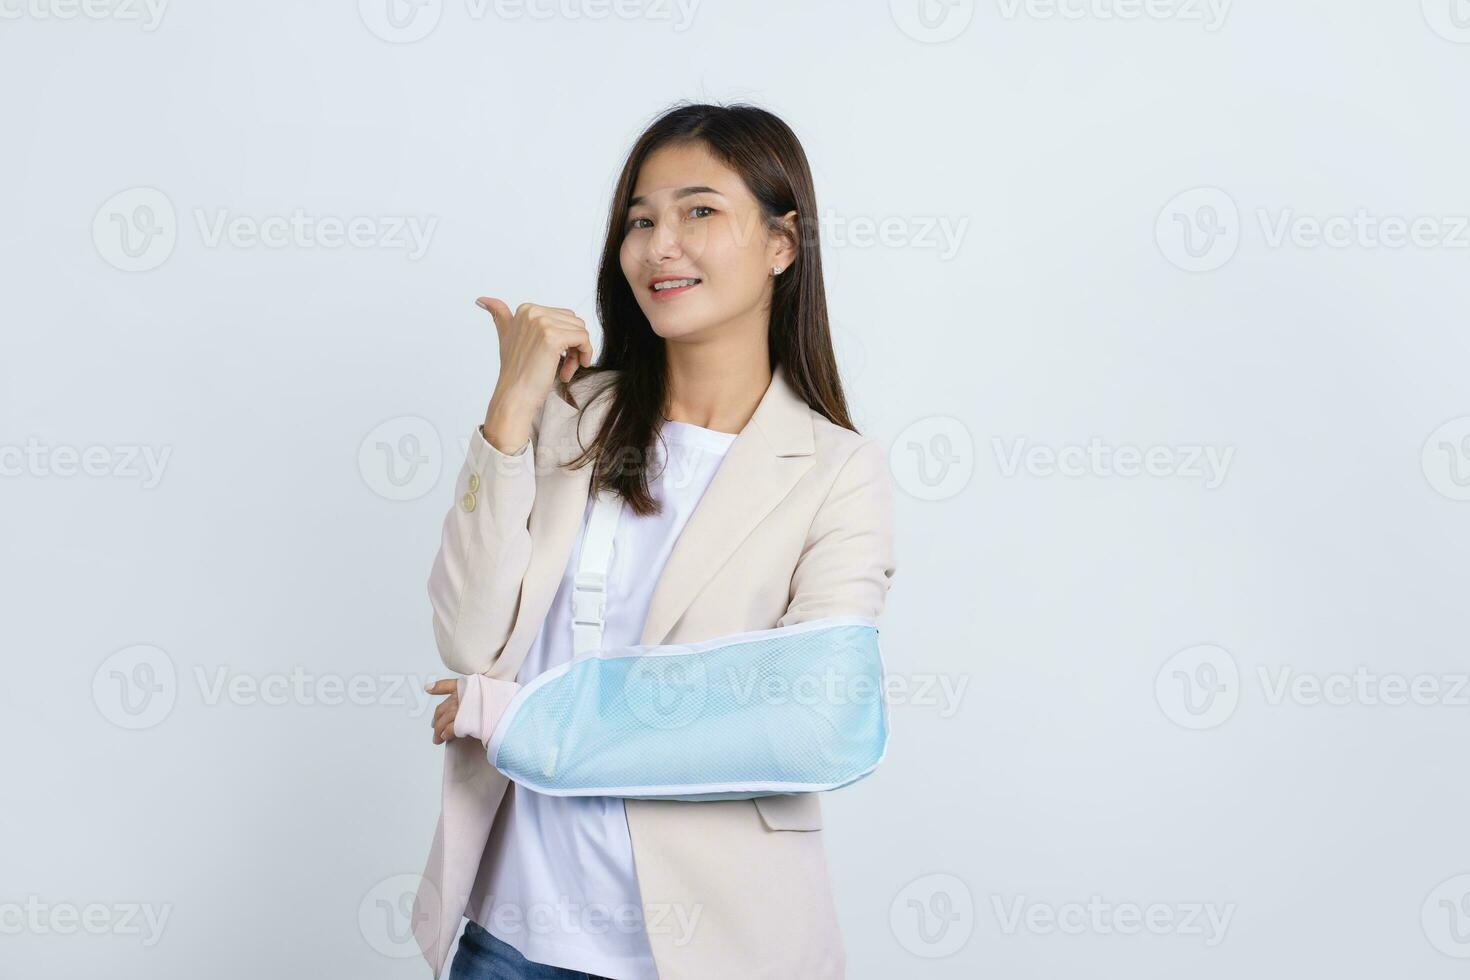 Beautiful Asian girl with broken arm, she is smiling happily over white background, health concept, accident, insurance, life insurance, health, hospital photo